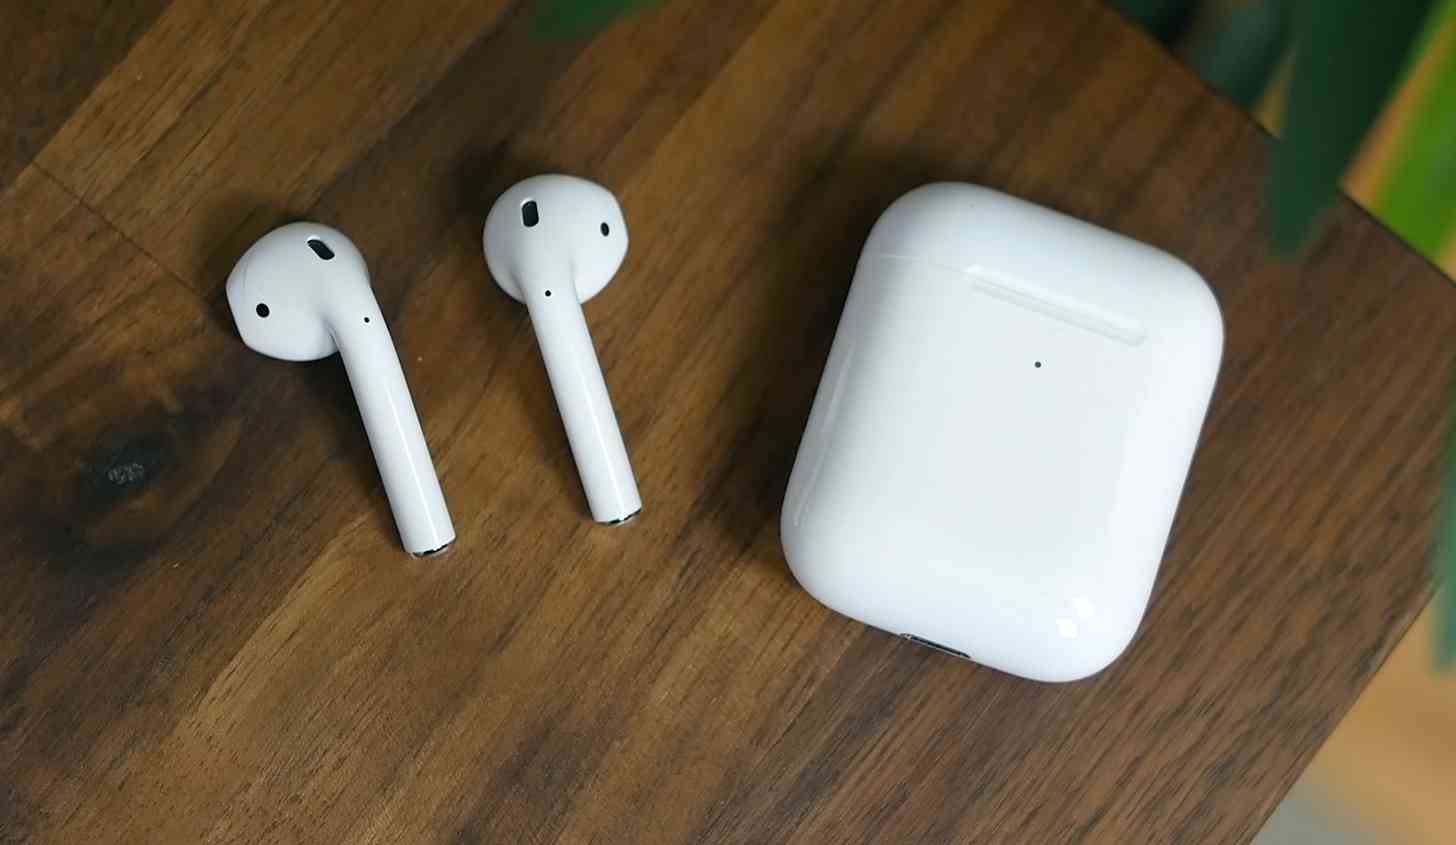 Apple AirPods 2 hands-on